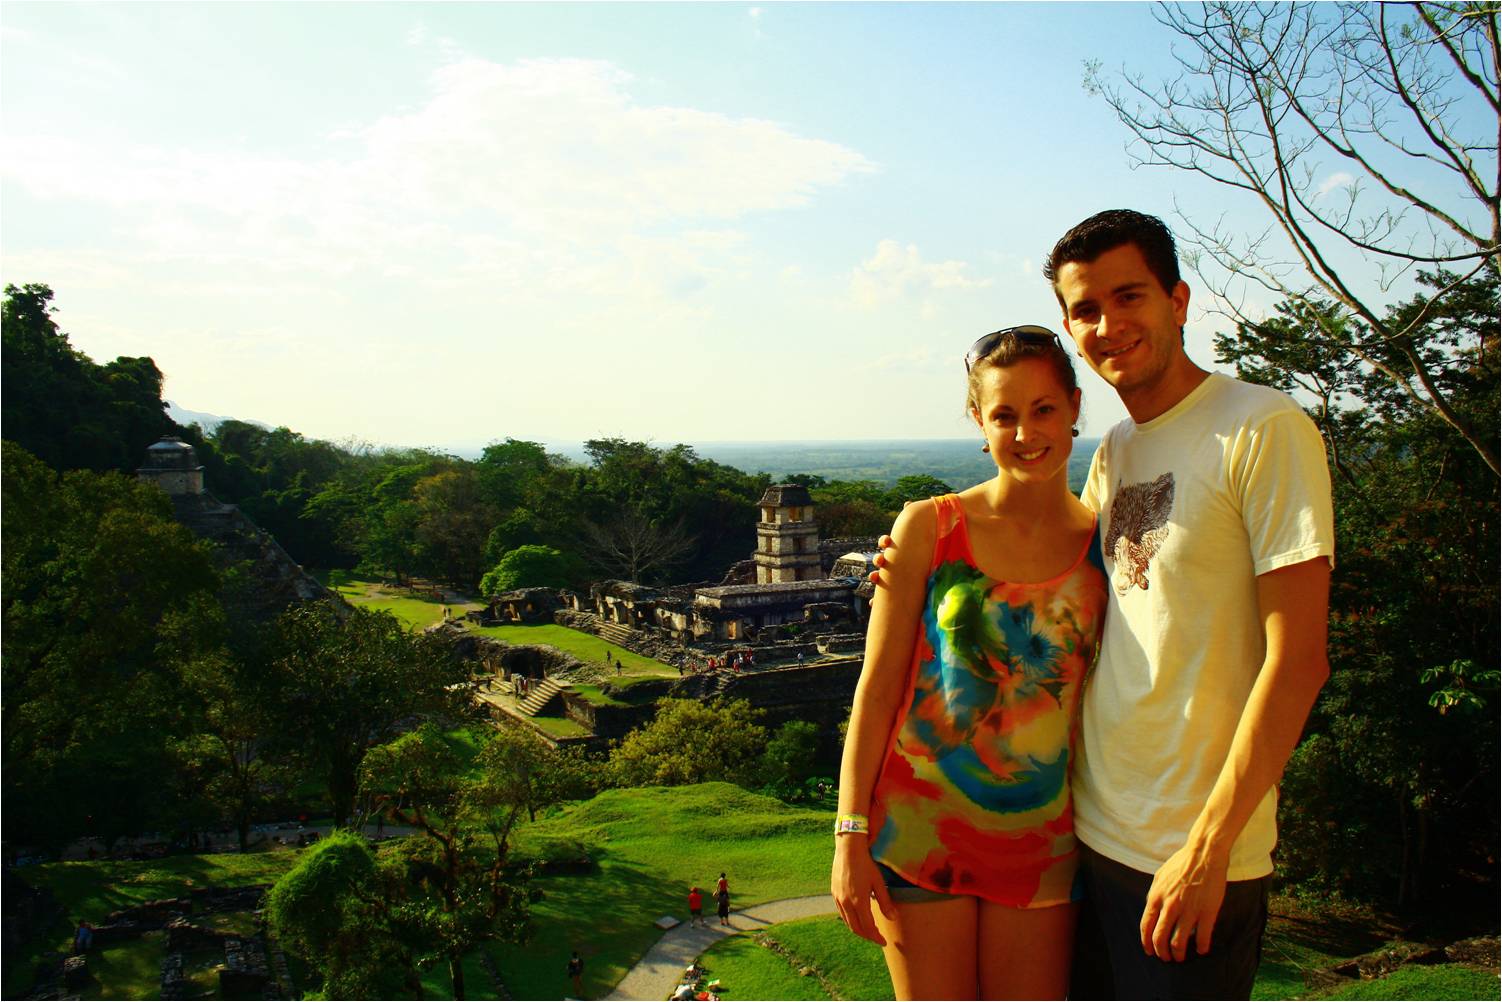 A Postcard from Palenque